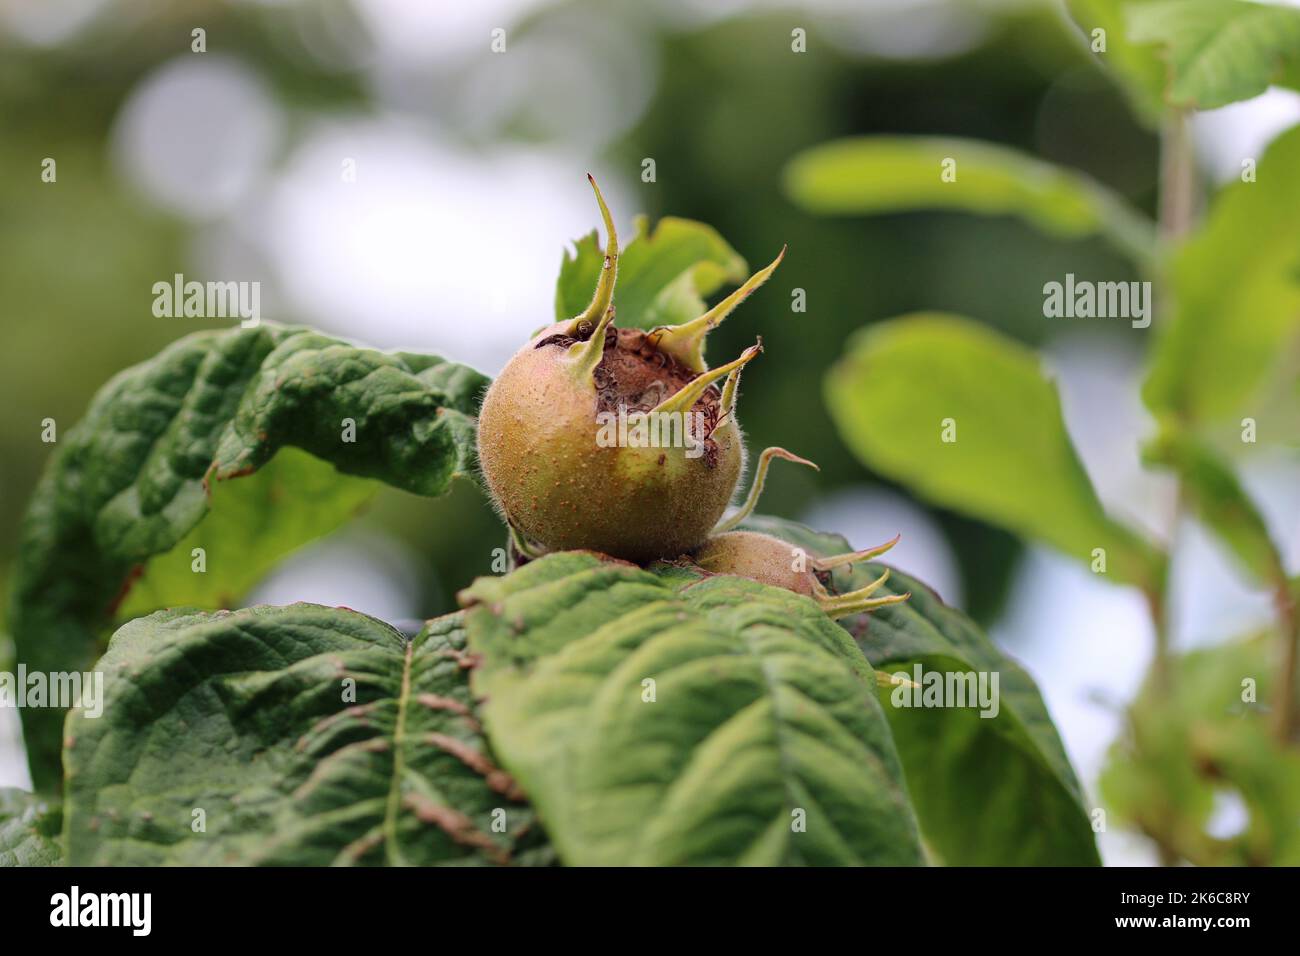 Ripe medlar, Mespilus germanica, fruits on a tree with leaves blurred as the background. Stock Photo